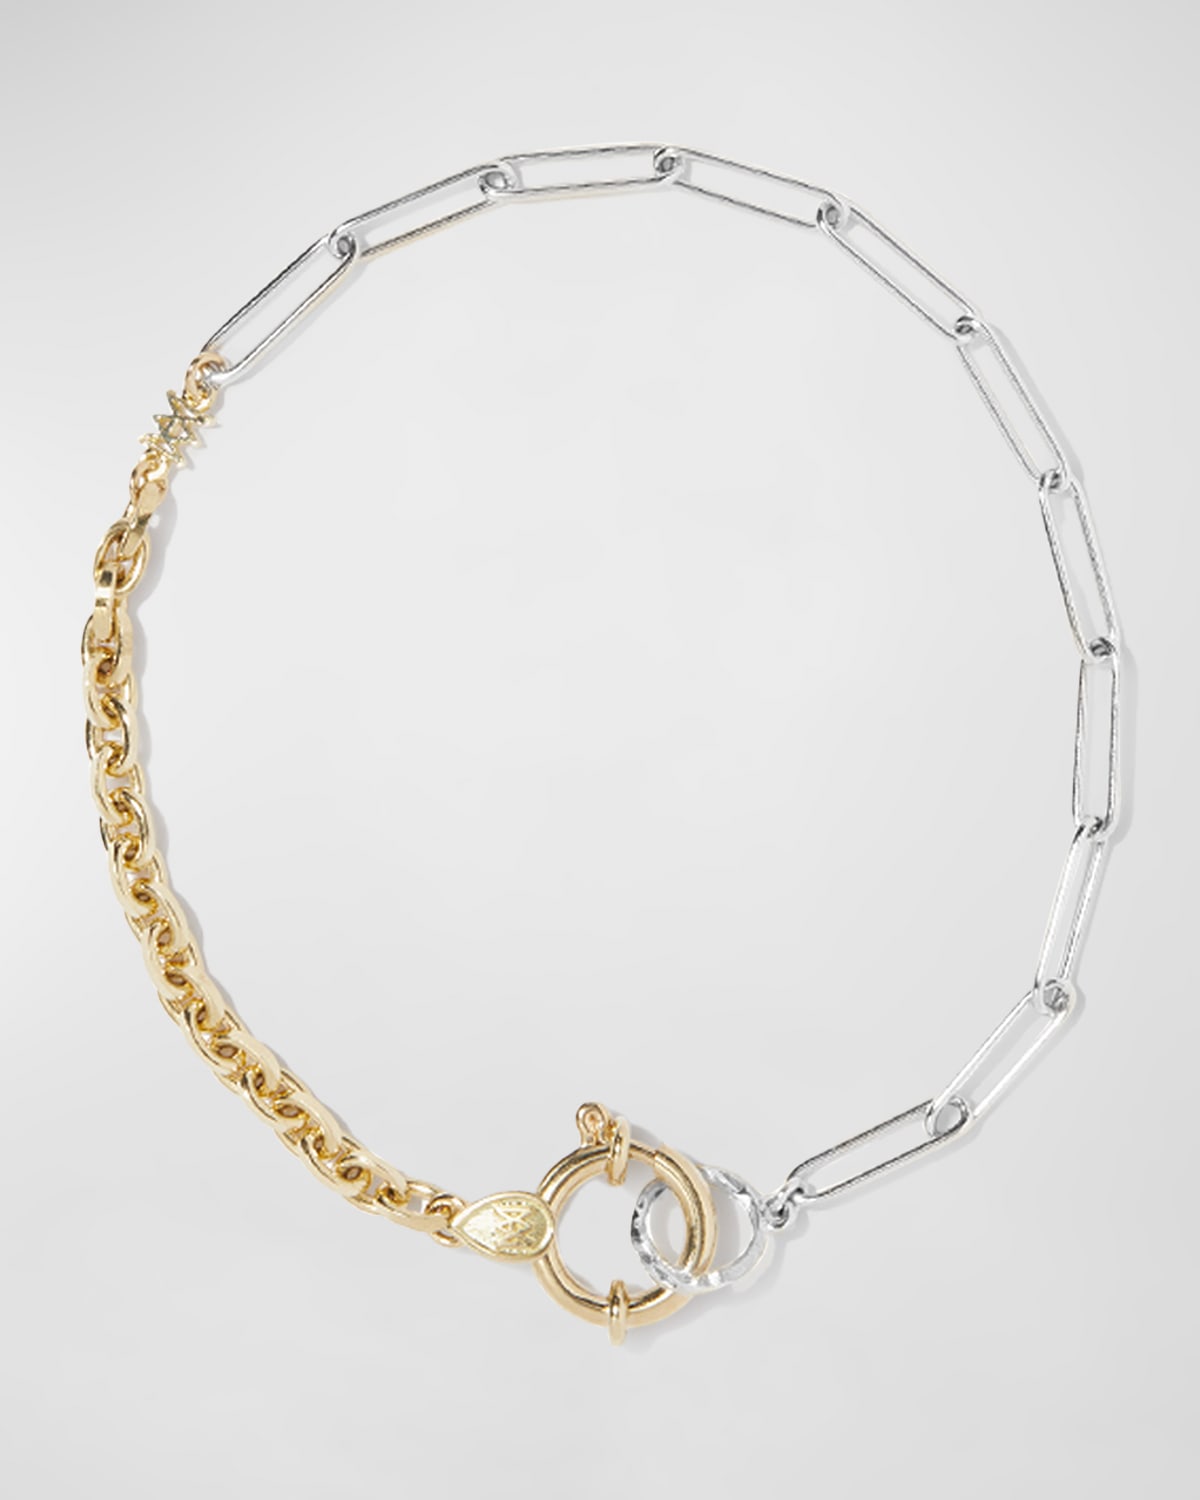 MILAMORE 18K Gold Two-Tone Duo Chain Bracelet